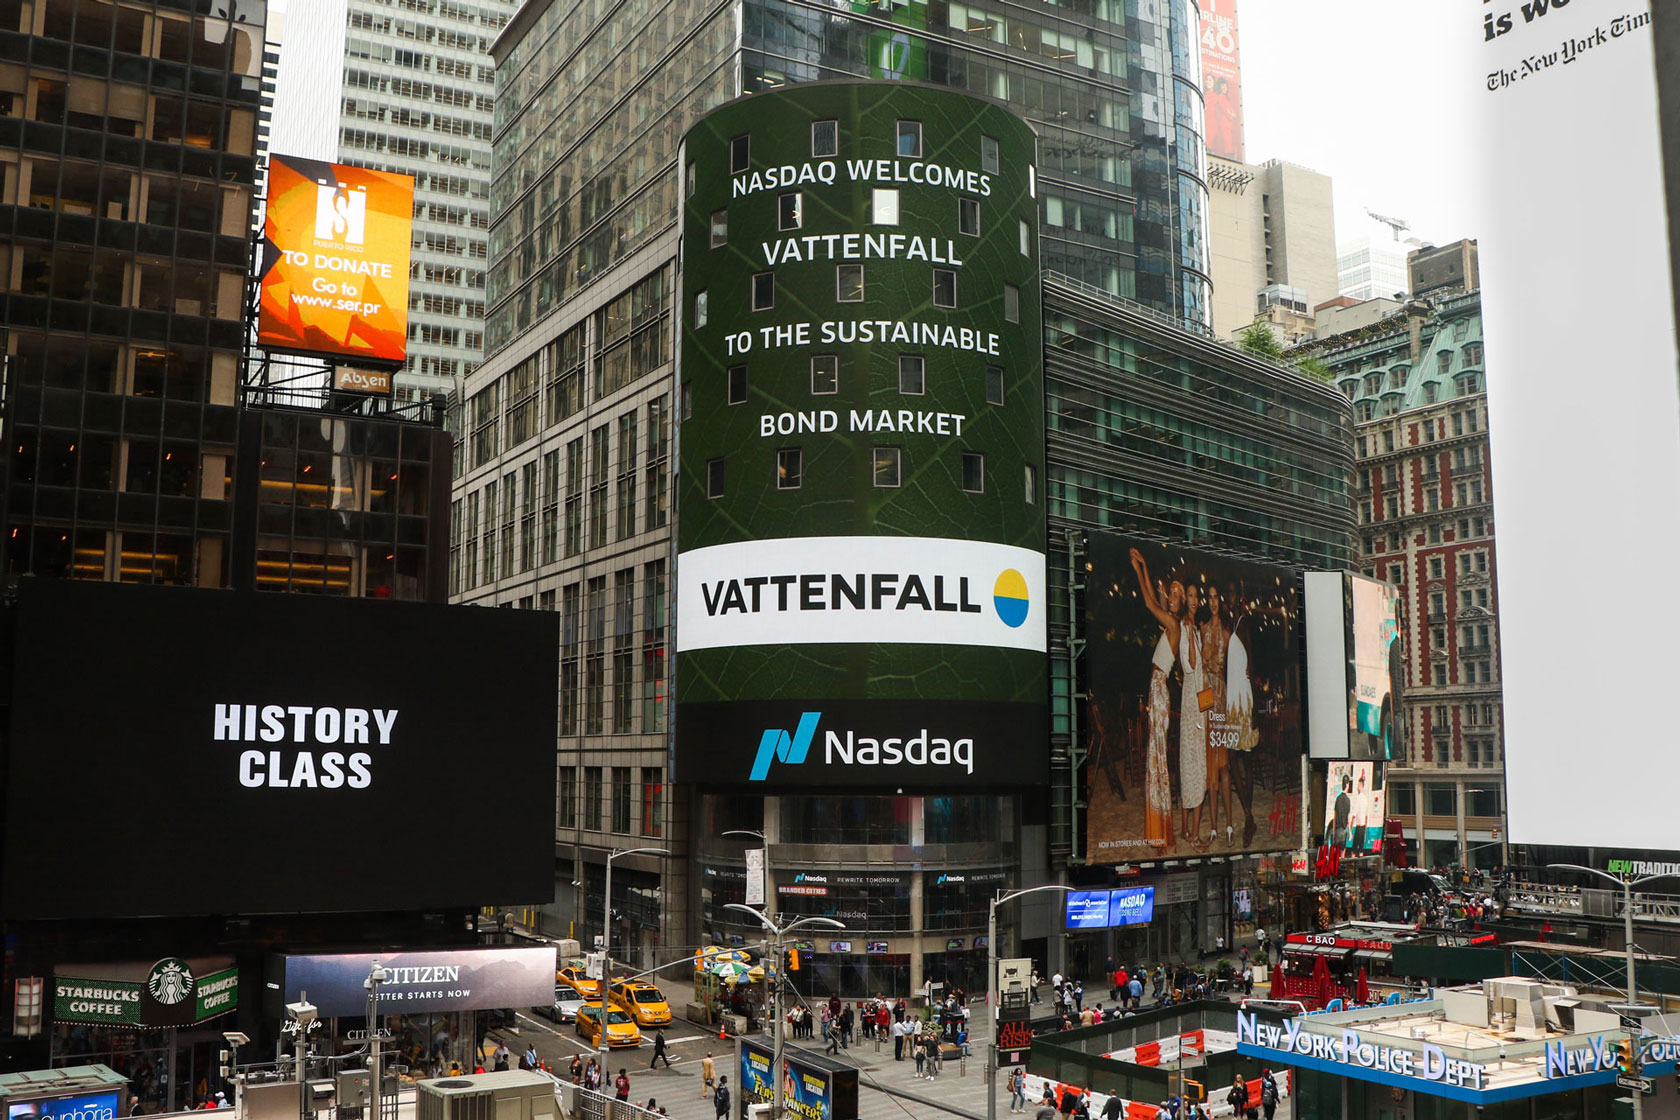 The Vattenfall green bond was listed on Nasdaq Stockholm, which advertised the bond on an electronic billboard in Times Square in New York on Friday 14 June 2019.